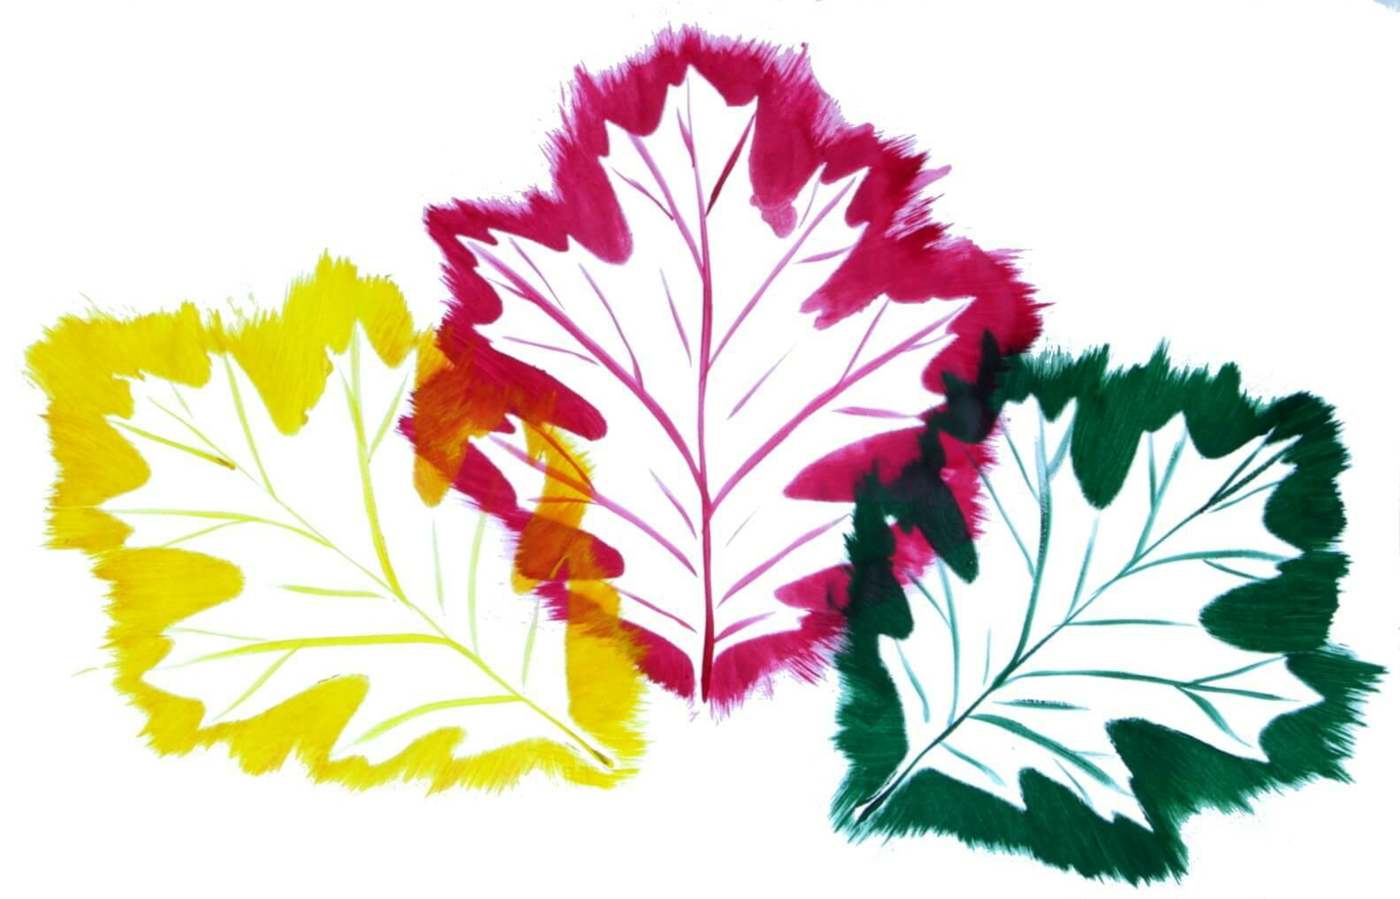 Use stencils and acrylic paint to paint sheets and draw leaf veins